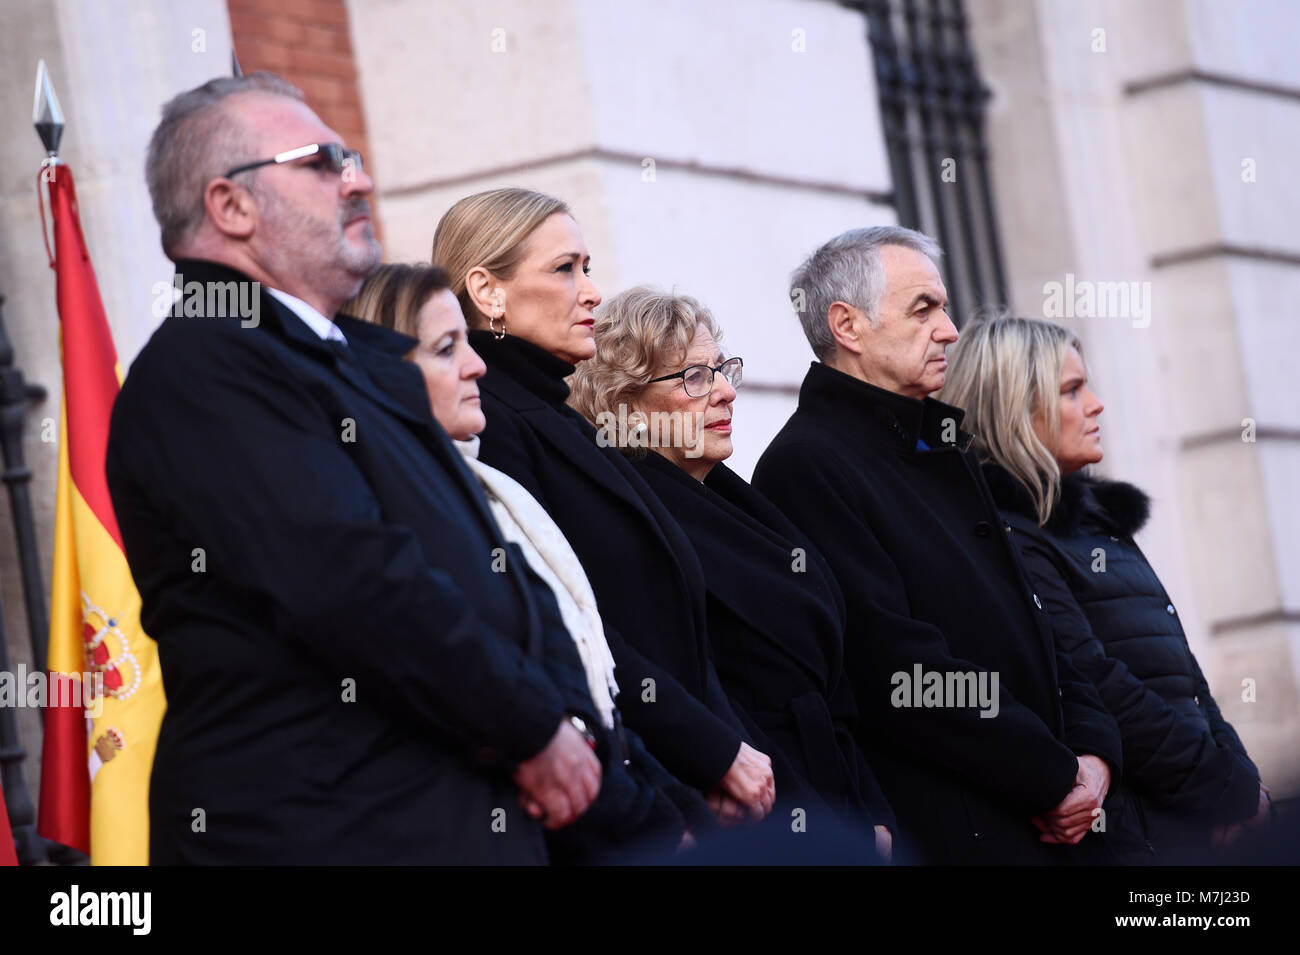 Madrid, Spain. 11th March, 2018. President of the Community of Madrid, Cristina Cifuentes and the Mayor of Madrid, Manuela Carmena during a tribute in memory of the victims of the attack of 11-M 2004, at the Headquarters of the Community of Madrid on Sunday 11 March 2018. Credit: Gtres Información más Comuniación on line, S.L./Alamy Live News Stock Photo